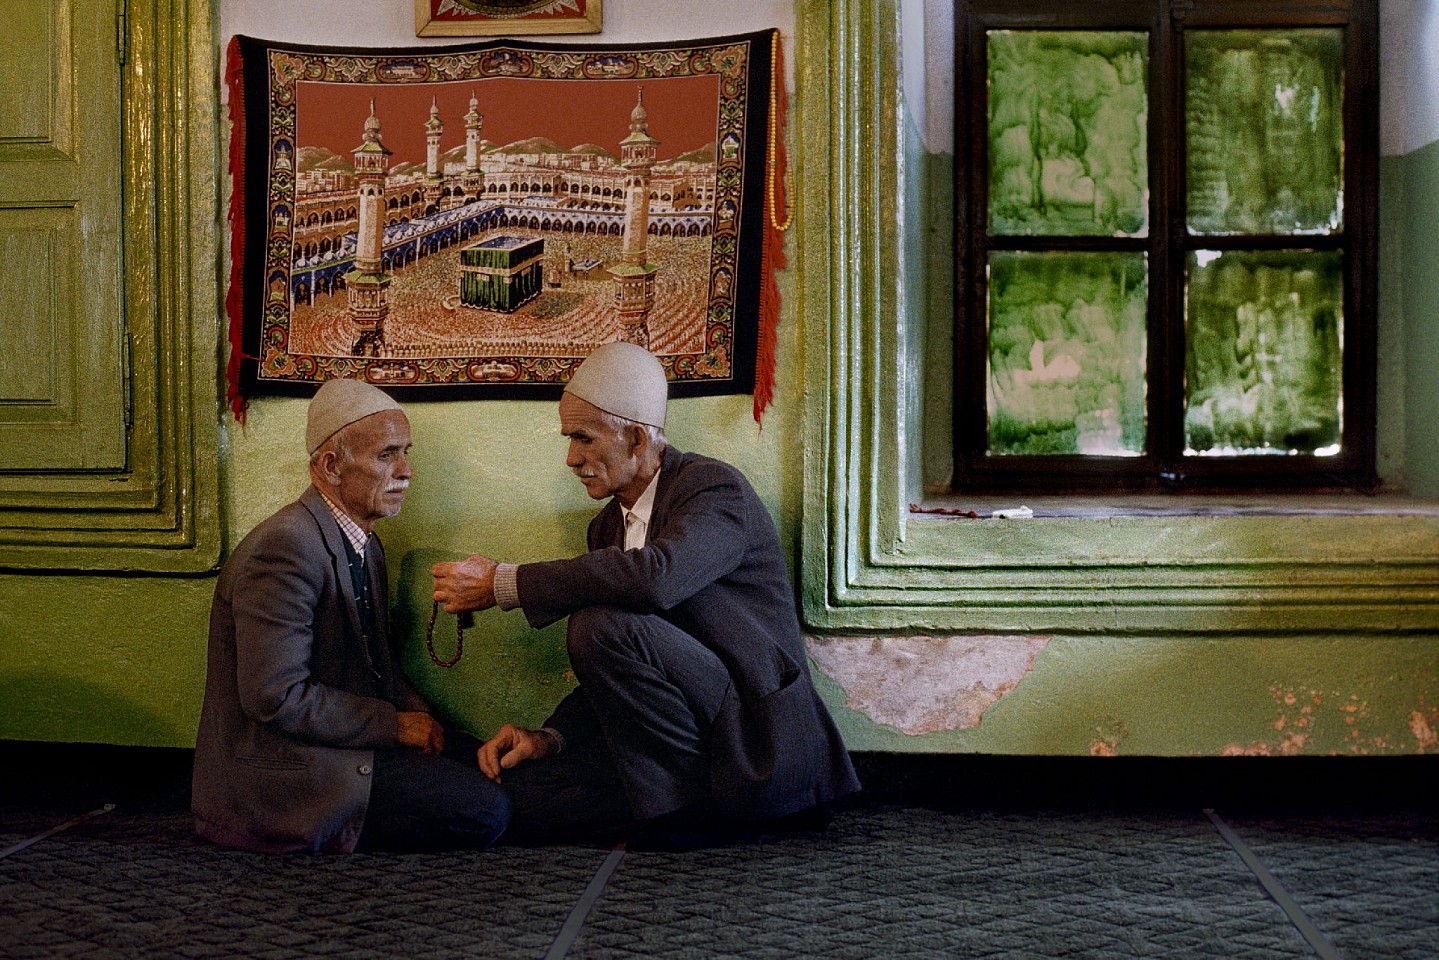 Steve McCurry, Two Men Pray, 1989
FujiFlex Crystal Archive Print
Price/Size on request